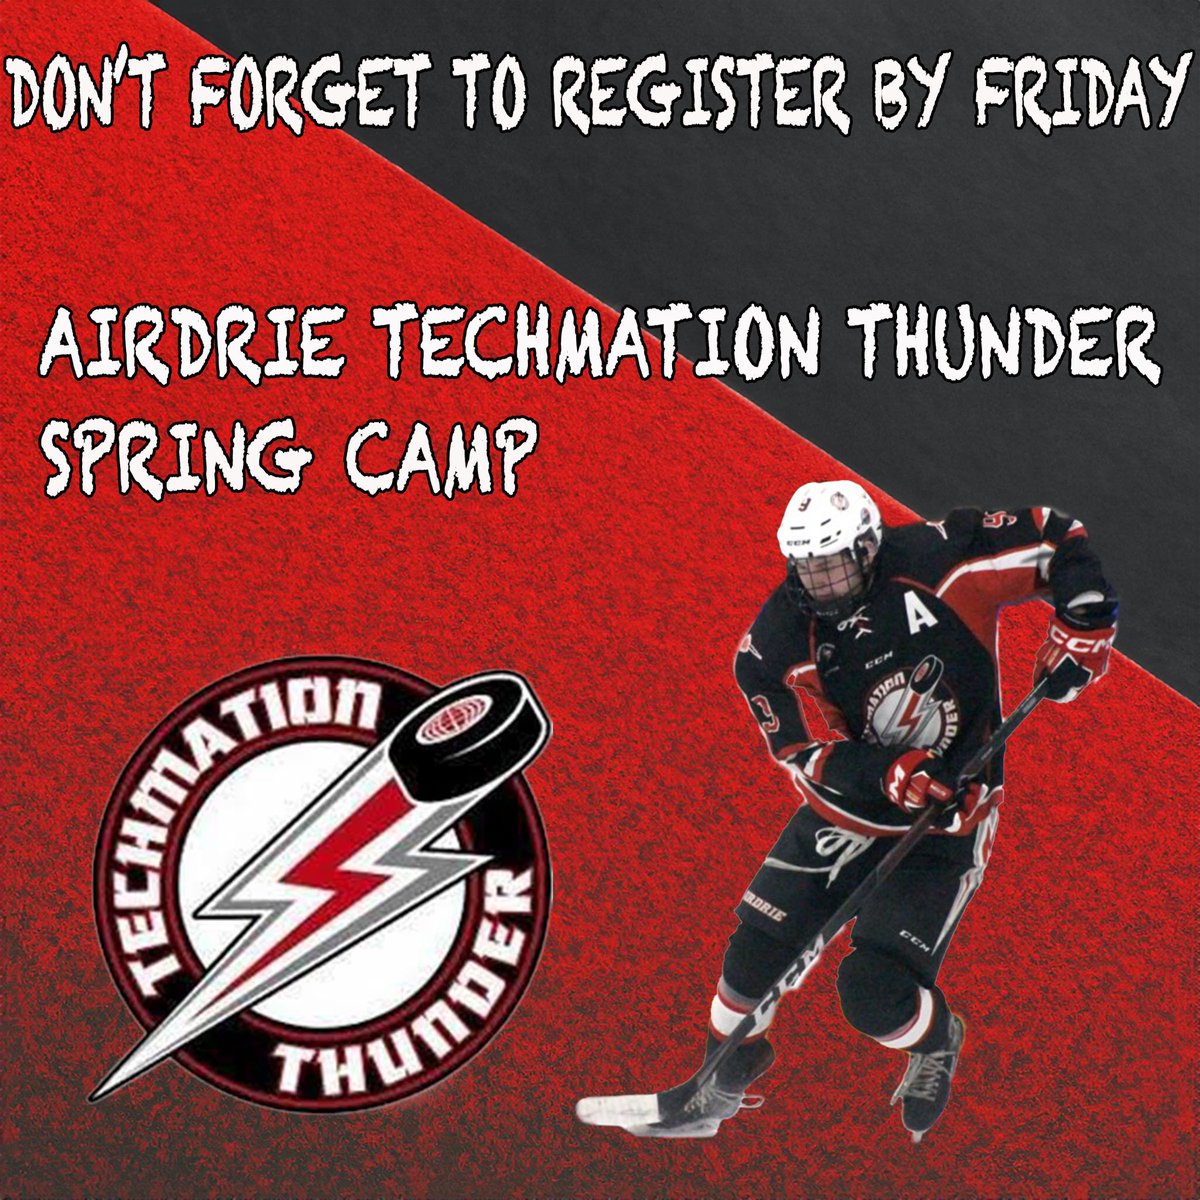 Reminder!! If you are looking to attend spring camp, be sure to register by Friday at the latest. We hope to see you there 🏒🌩️ #airdriethunder